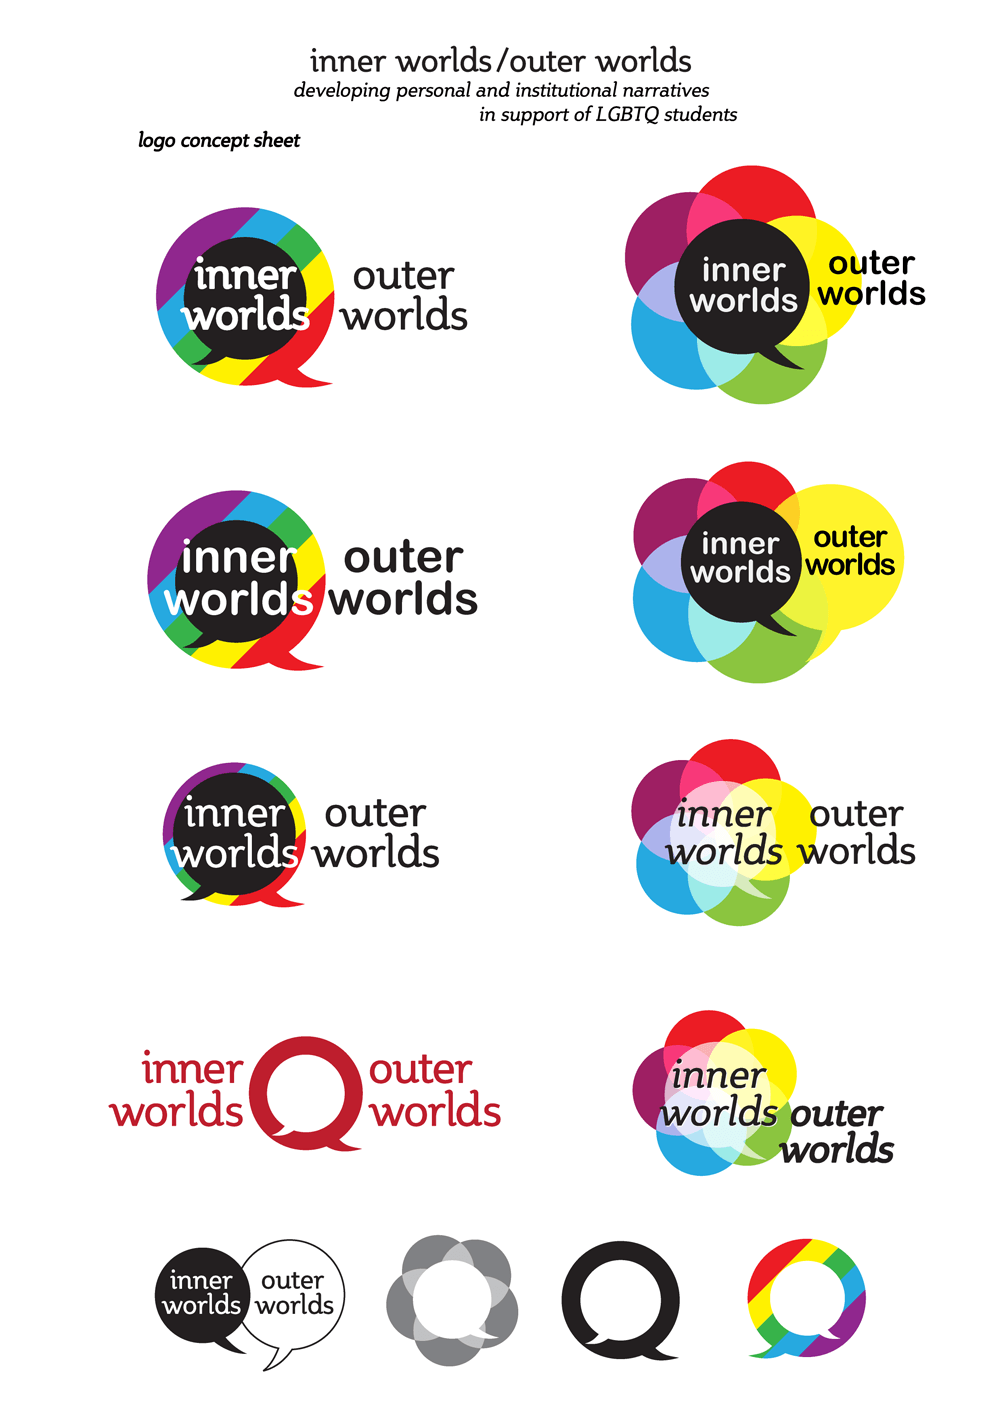 Conference Logo - Inner Worlds, Outer Worlds conference logo design sketches